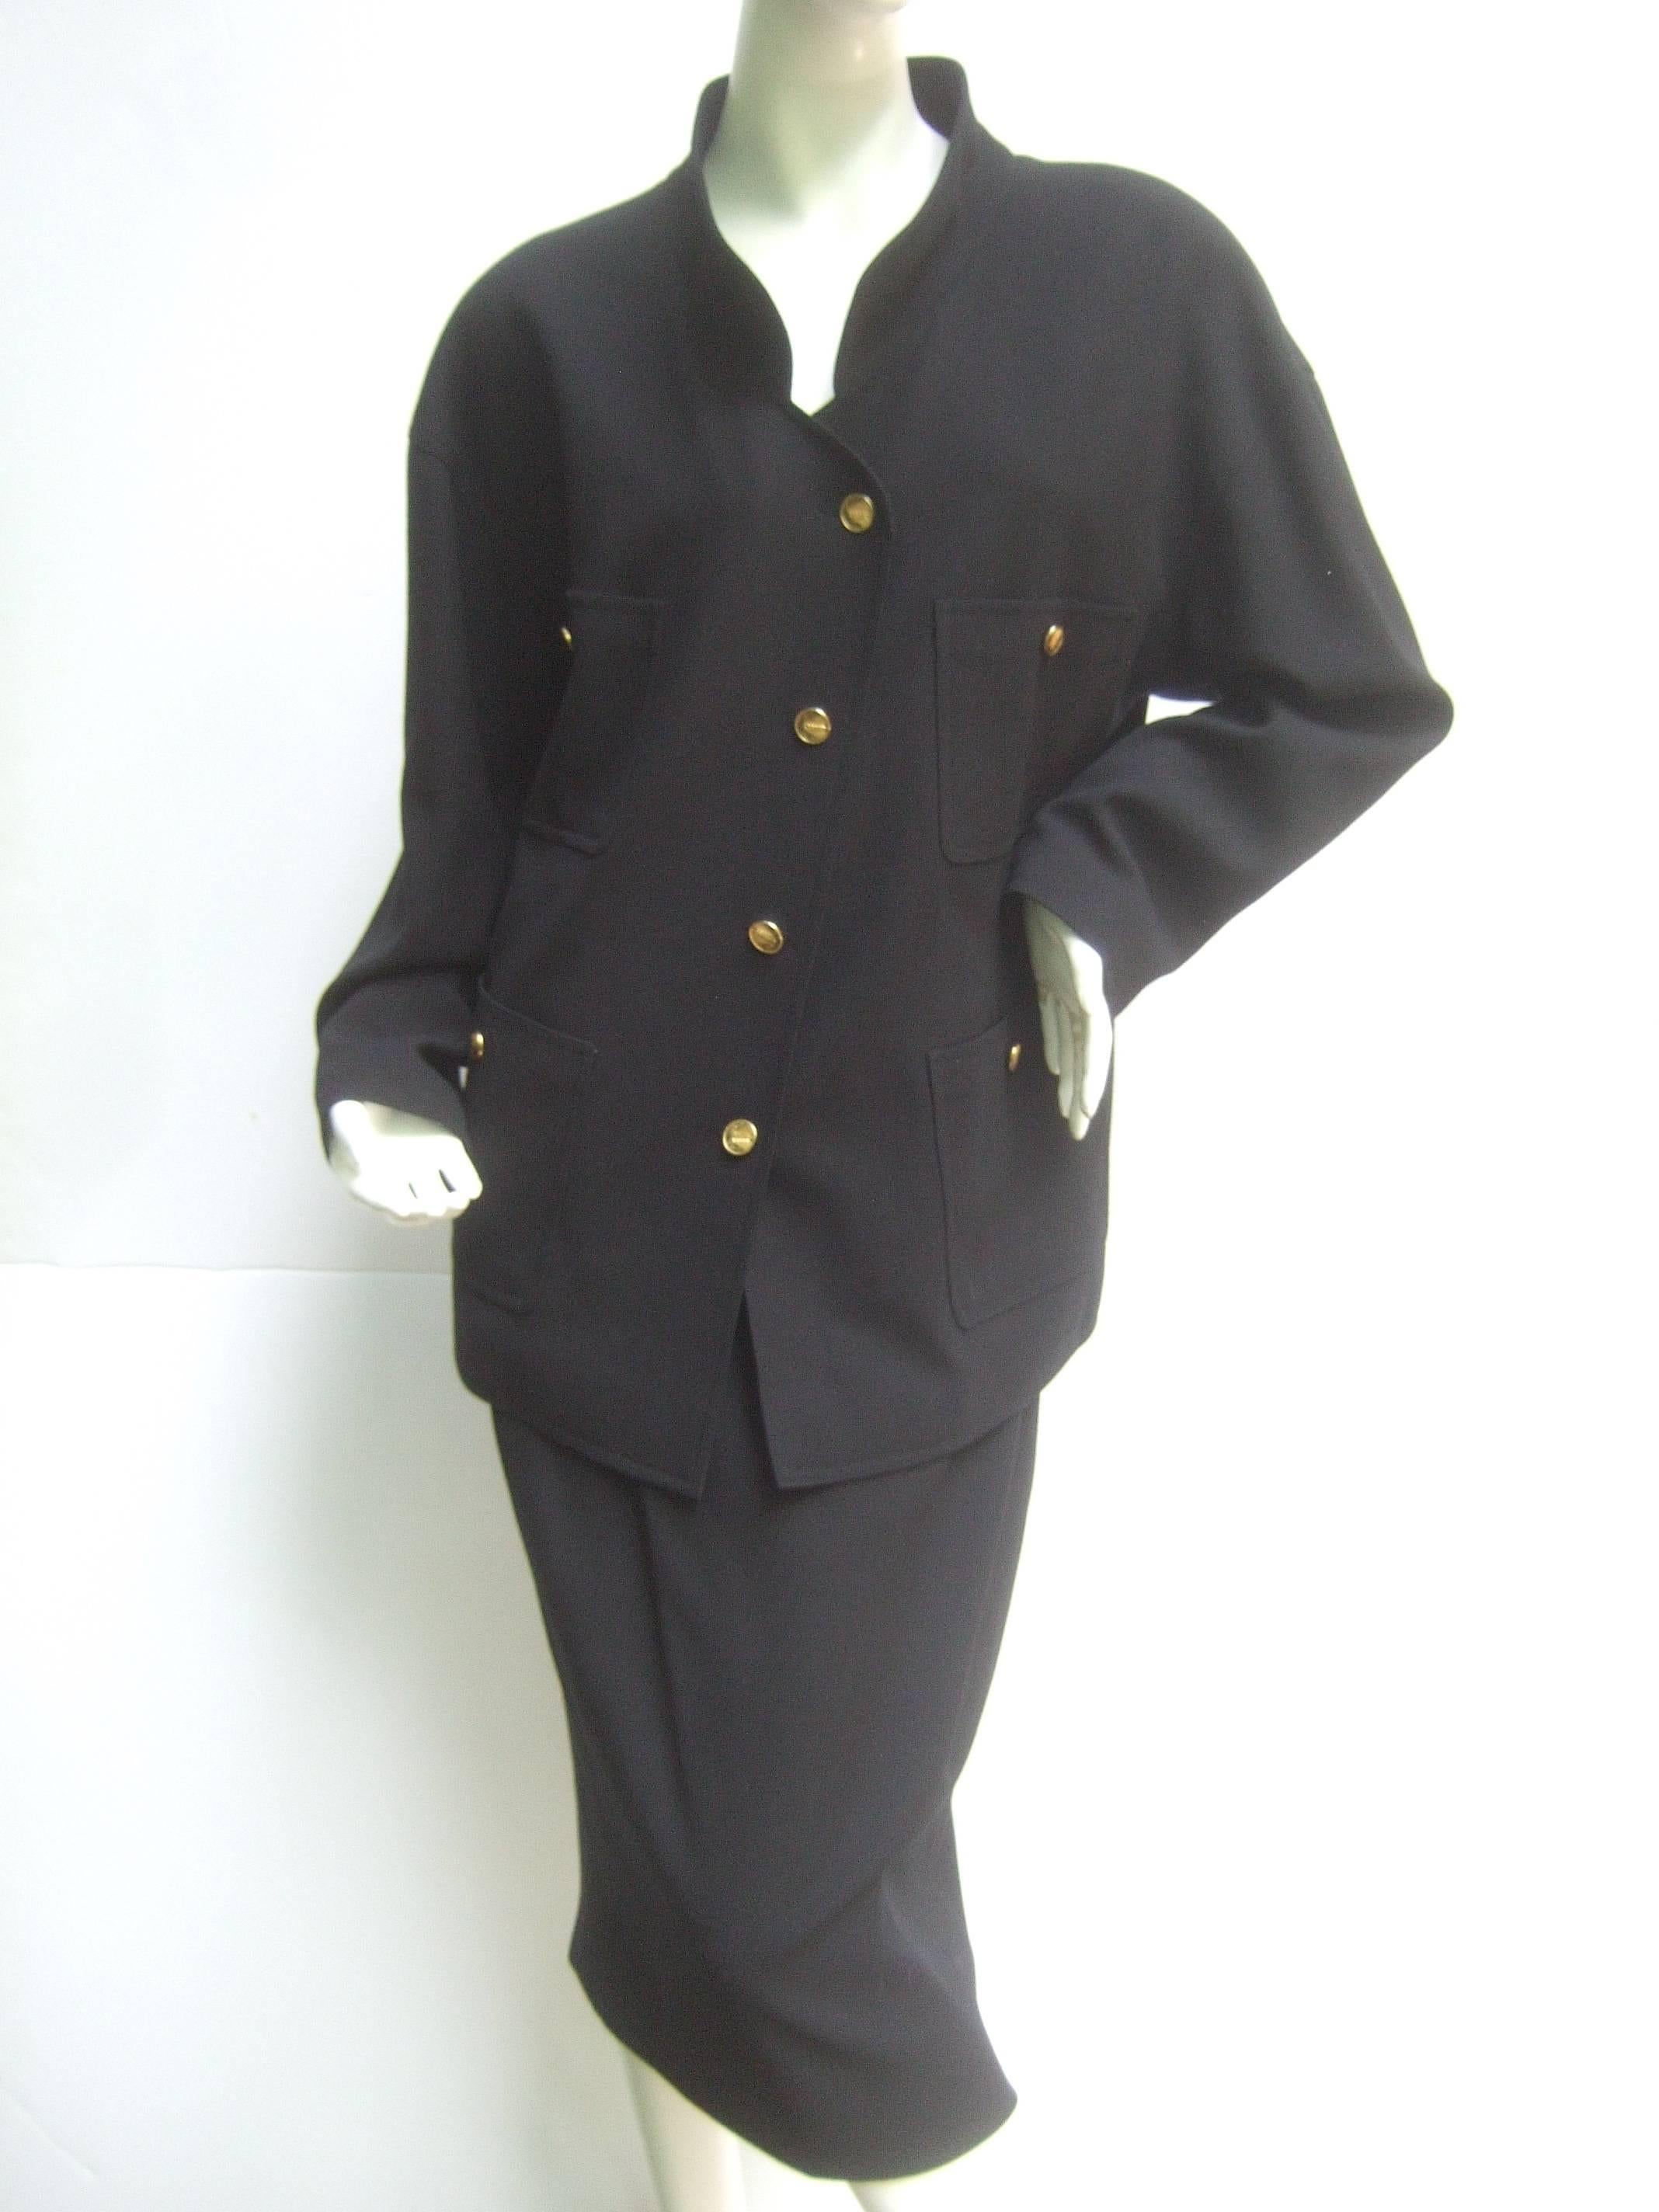 Chanel Classic black wool skirt suit ca 1990s
The stylish ensemble is designed with
light weight laine wool shell and is silk
lined

The chic jacket has a nehru style collar that 
has a military influence. The light weight wool 
jacket is adorned